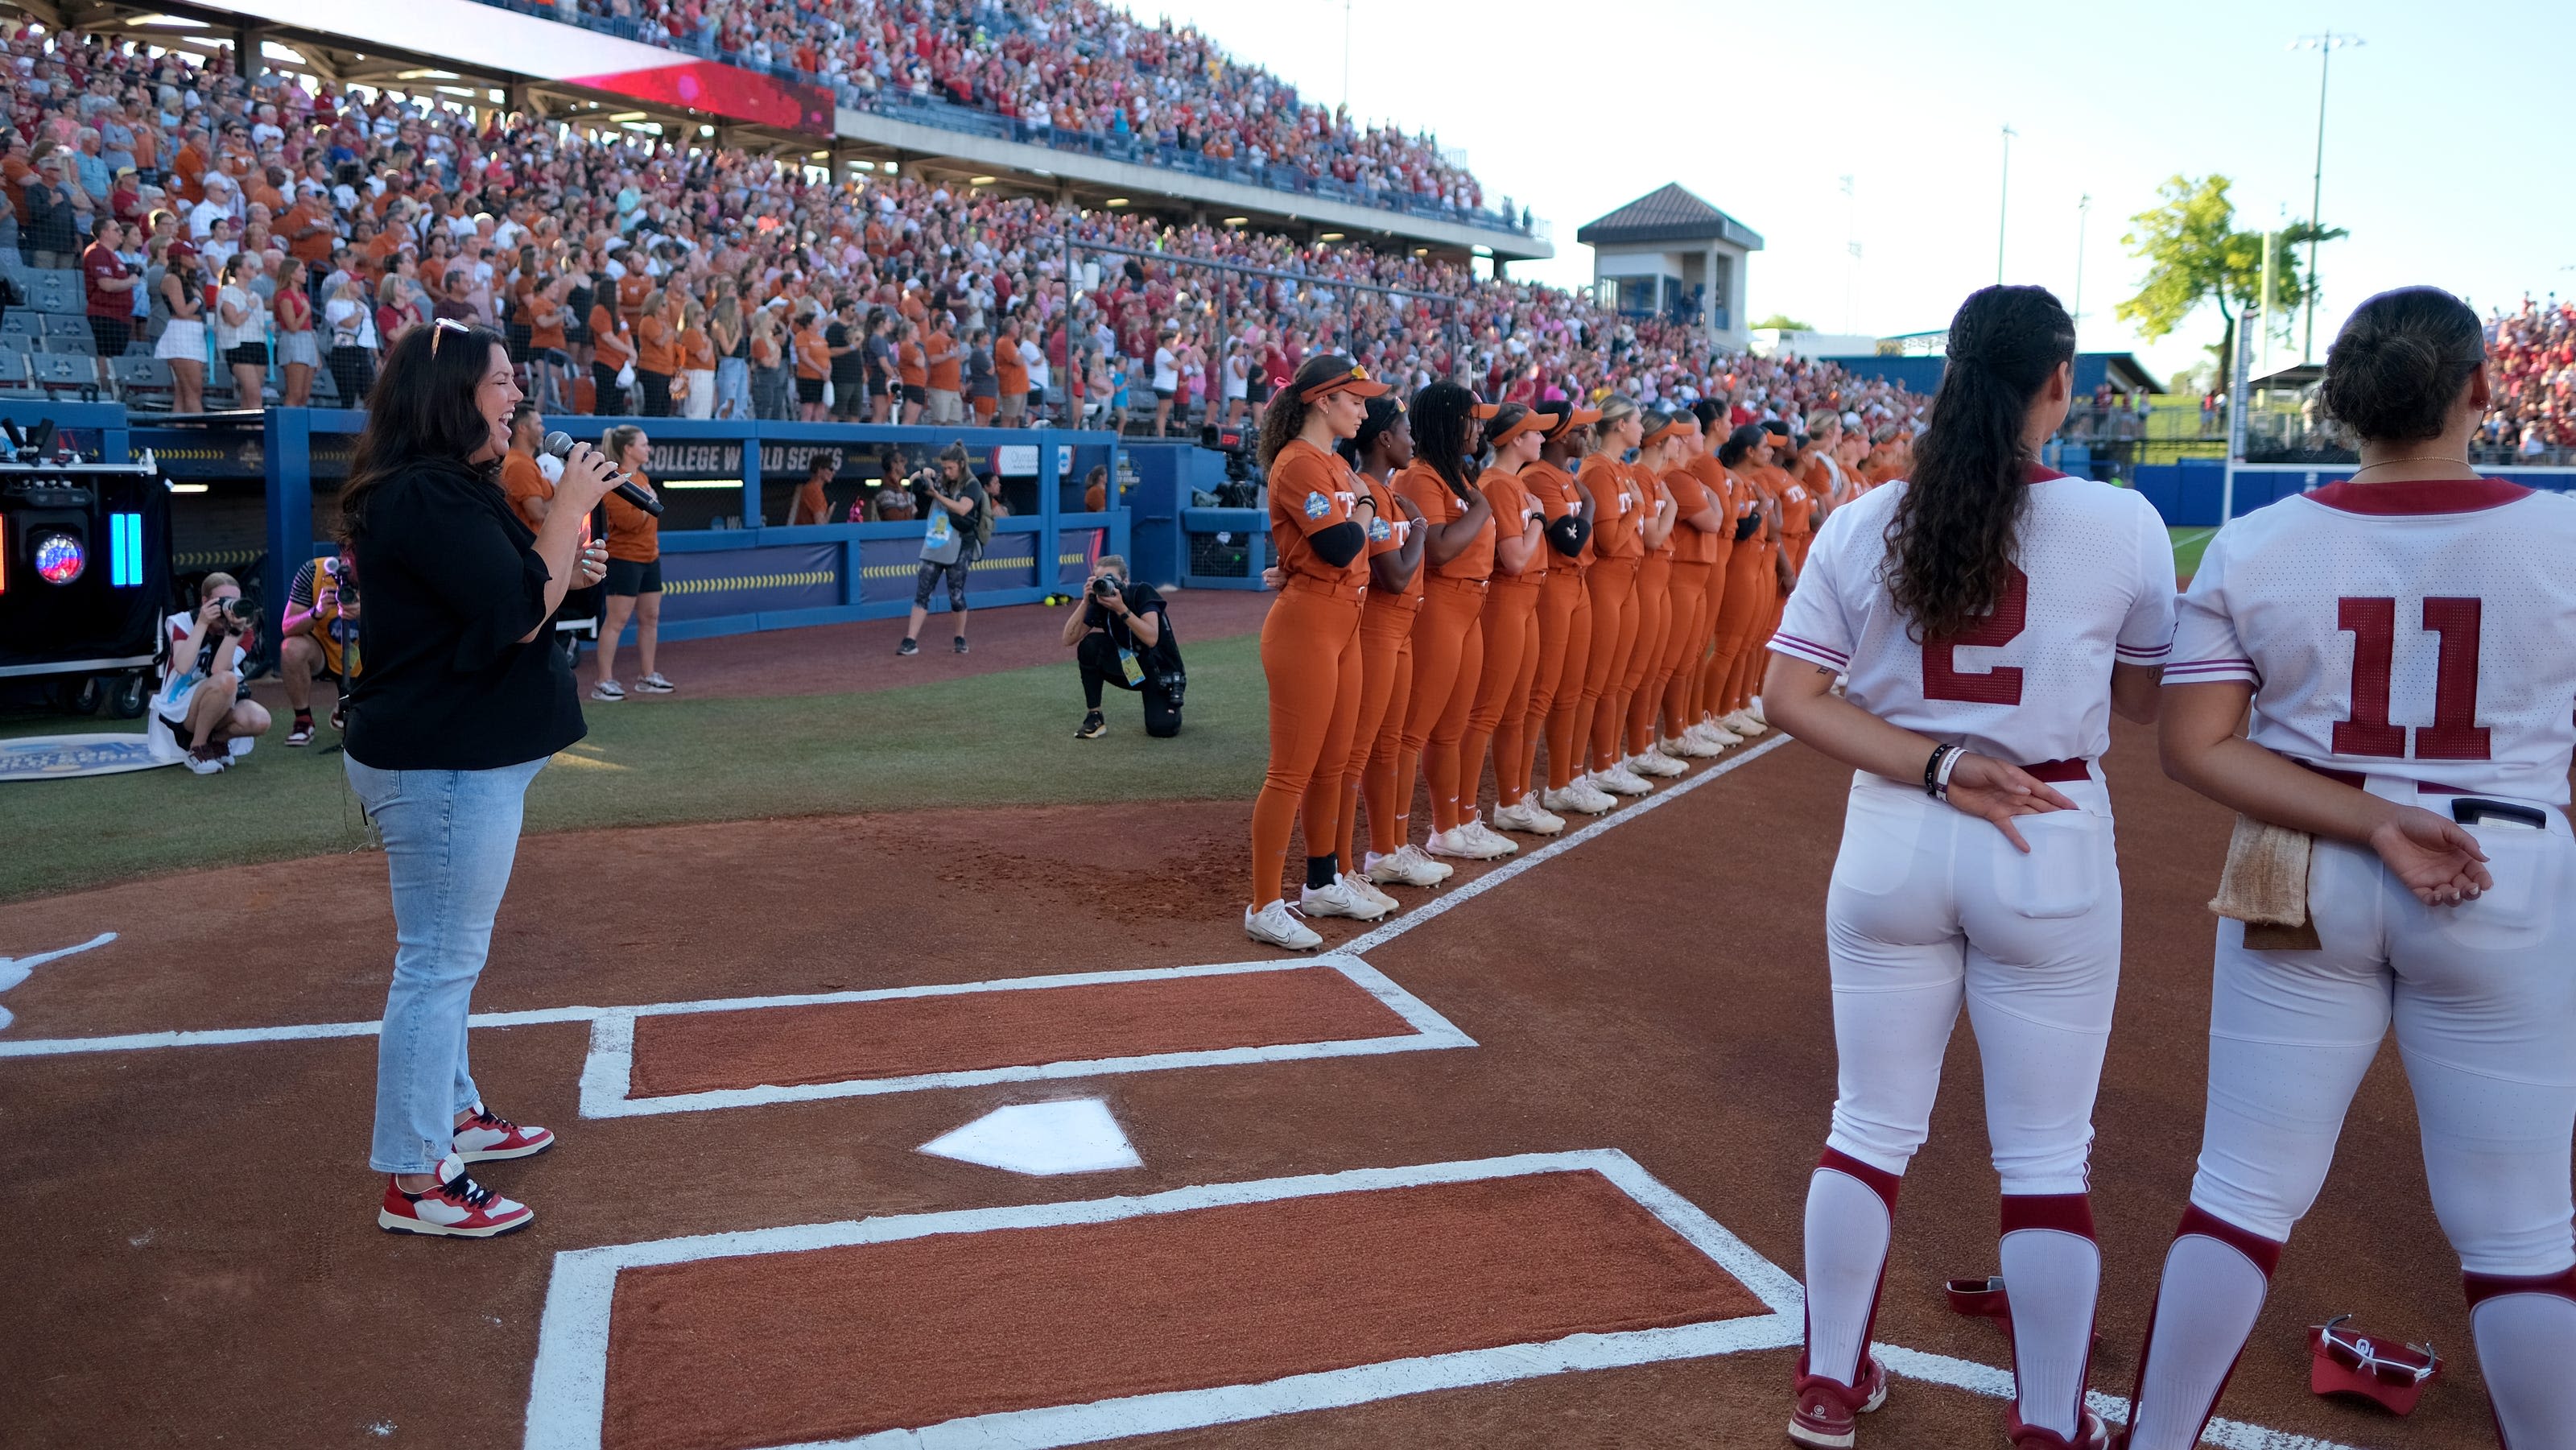 Toby Keith's daughter Krystal sings national anthem before OU vs Texas WCWS softball game